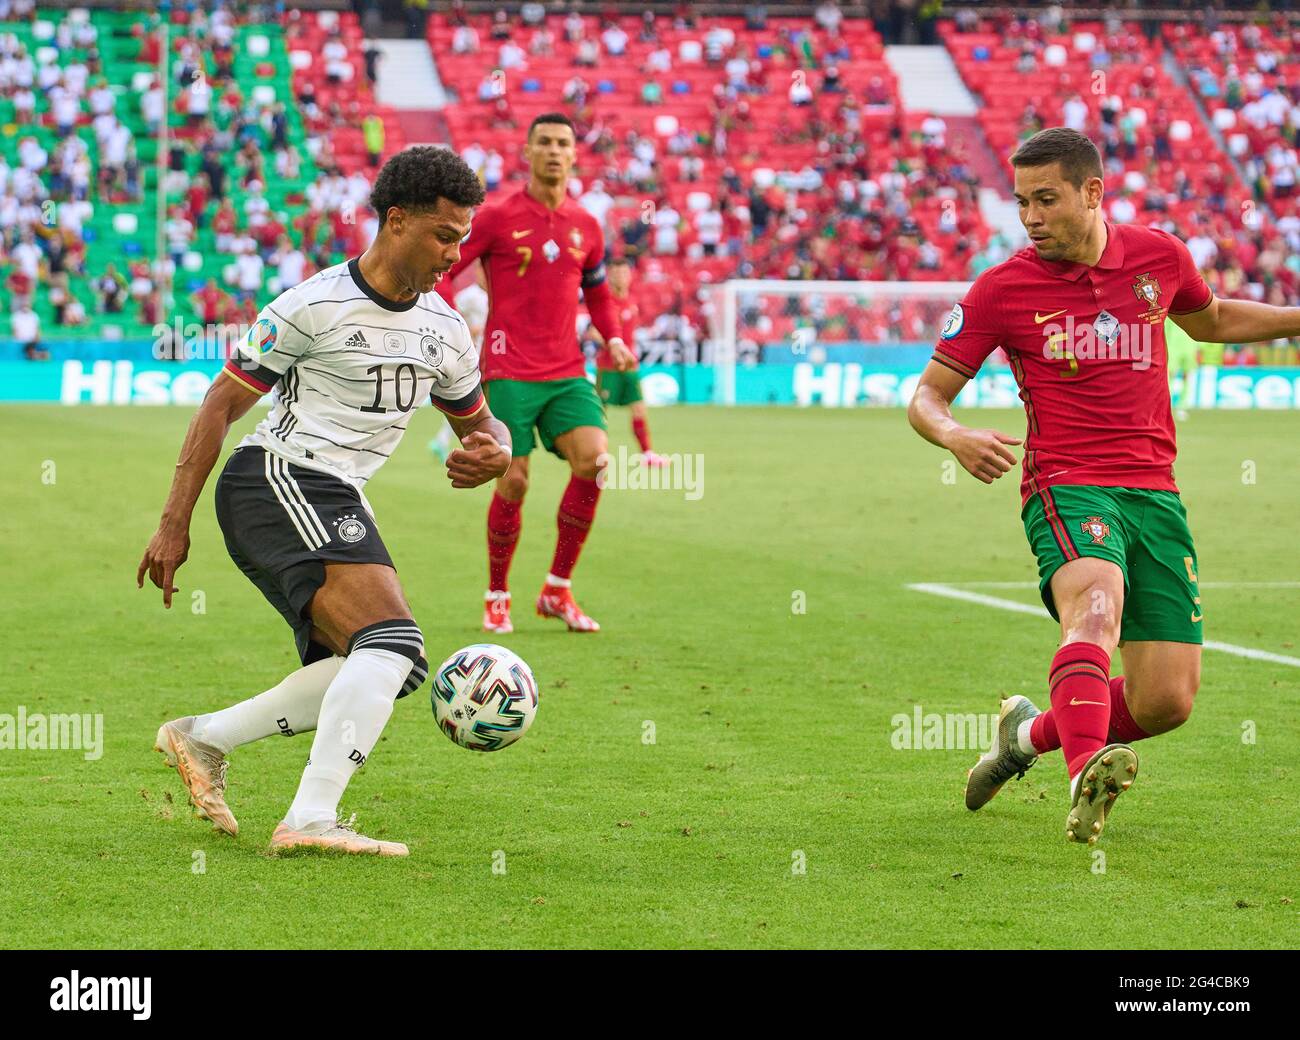 Munich, Germany. 19th June, 2021. Munich, Germany. 19th June, 2021. Serge Gnabry, DFB 10 compete for the ball, tackling, duel, header, zweikampf, action, fight against Raphael GUERREIRO, Por 5 in the Group F match PORTUGAL - GERMANY 2-4 at the football UEFA European Championships 2020 in Season 2020/2021 on June 19, 2021 in Munich, Germany. Credit: Peter Schatz/Alamy Live News Stock Photo